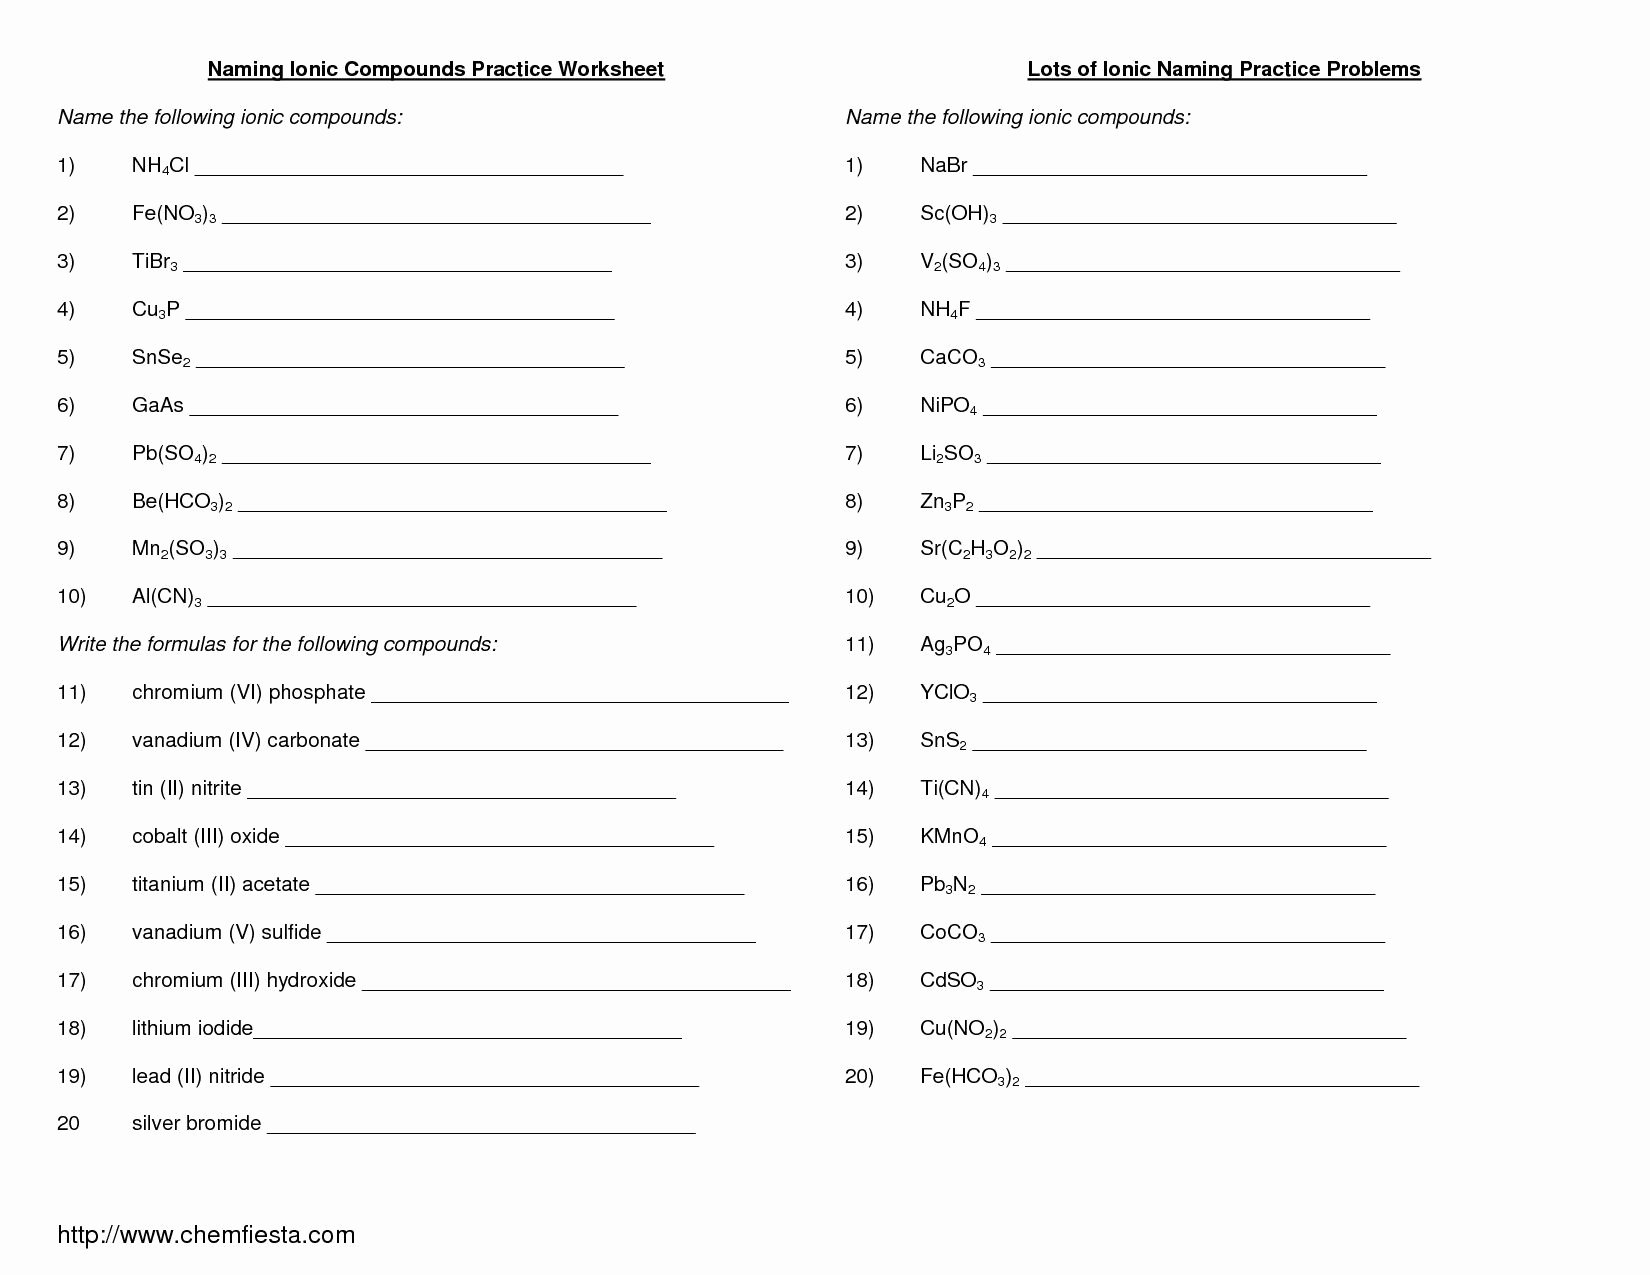 Naming Binary Ionic Compounds Worksheet Lovely formulas and Nomenclature Binary Ionic Pounds Worksheet